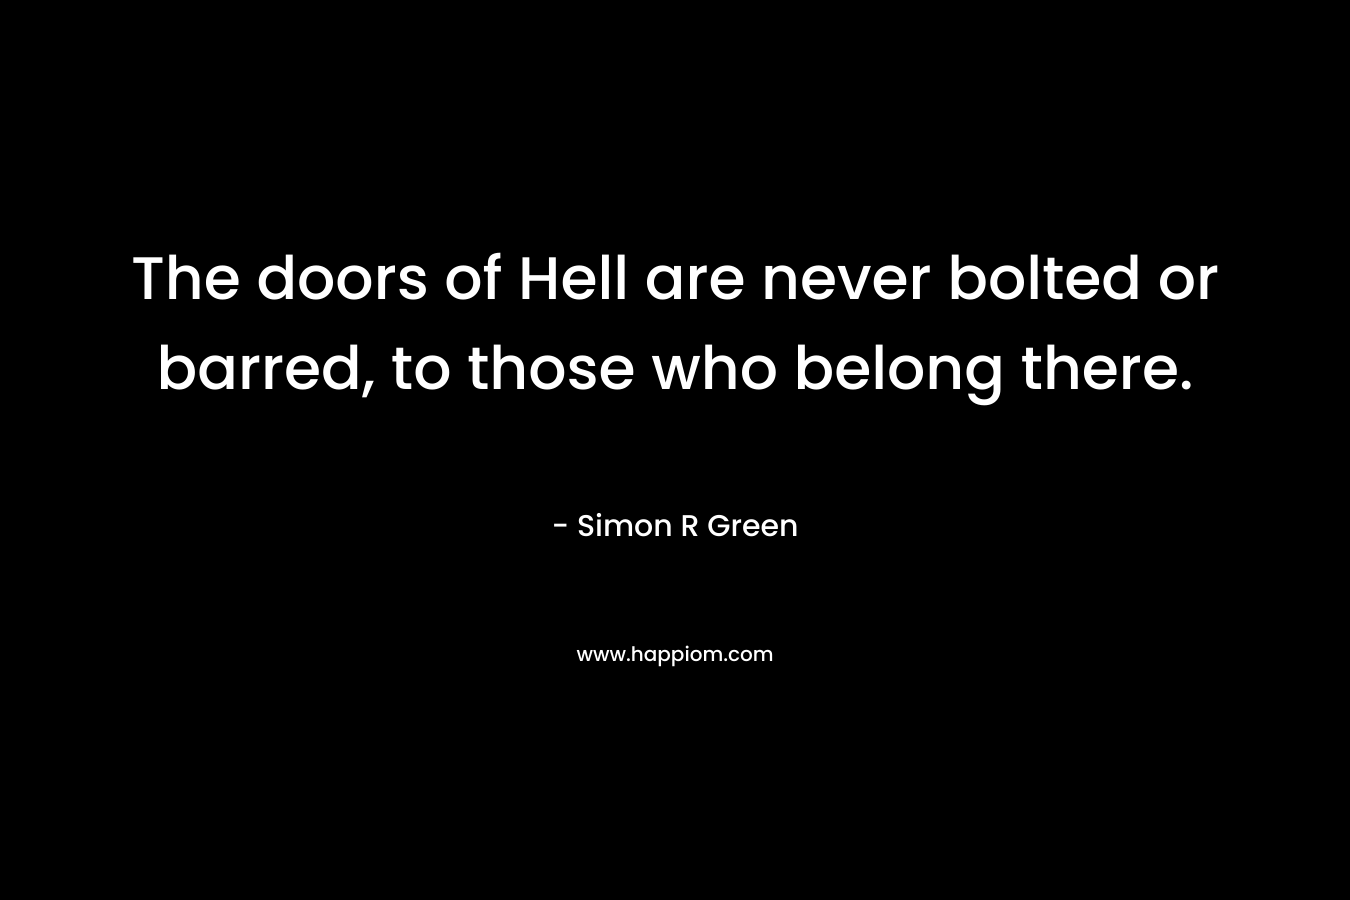 The doors of Hell are never bolted or barred, to those who belong there. – Simon R Green